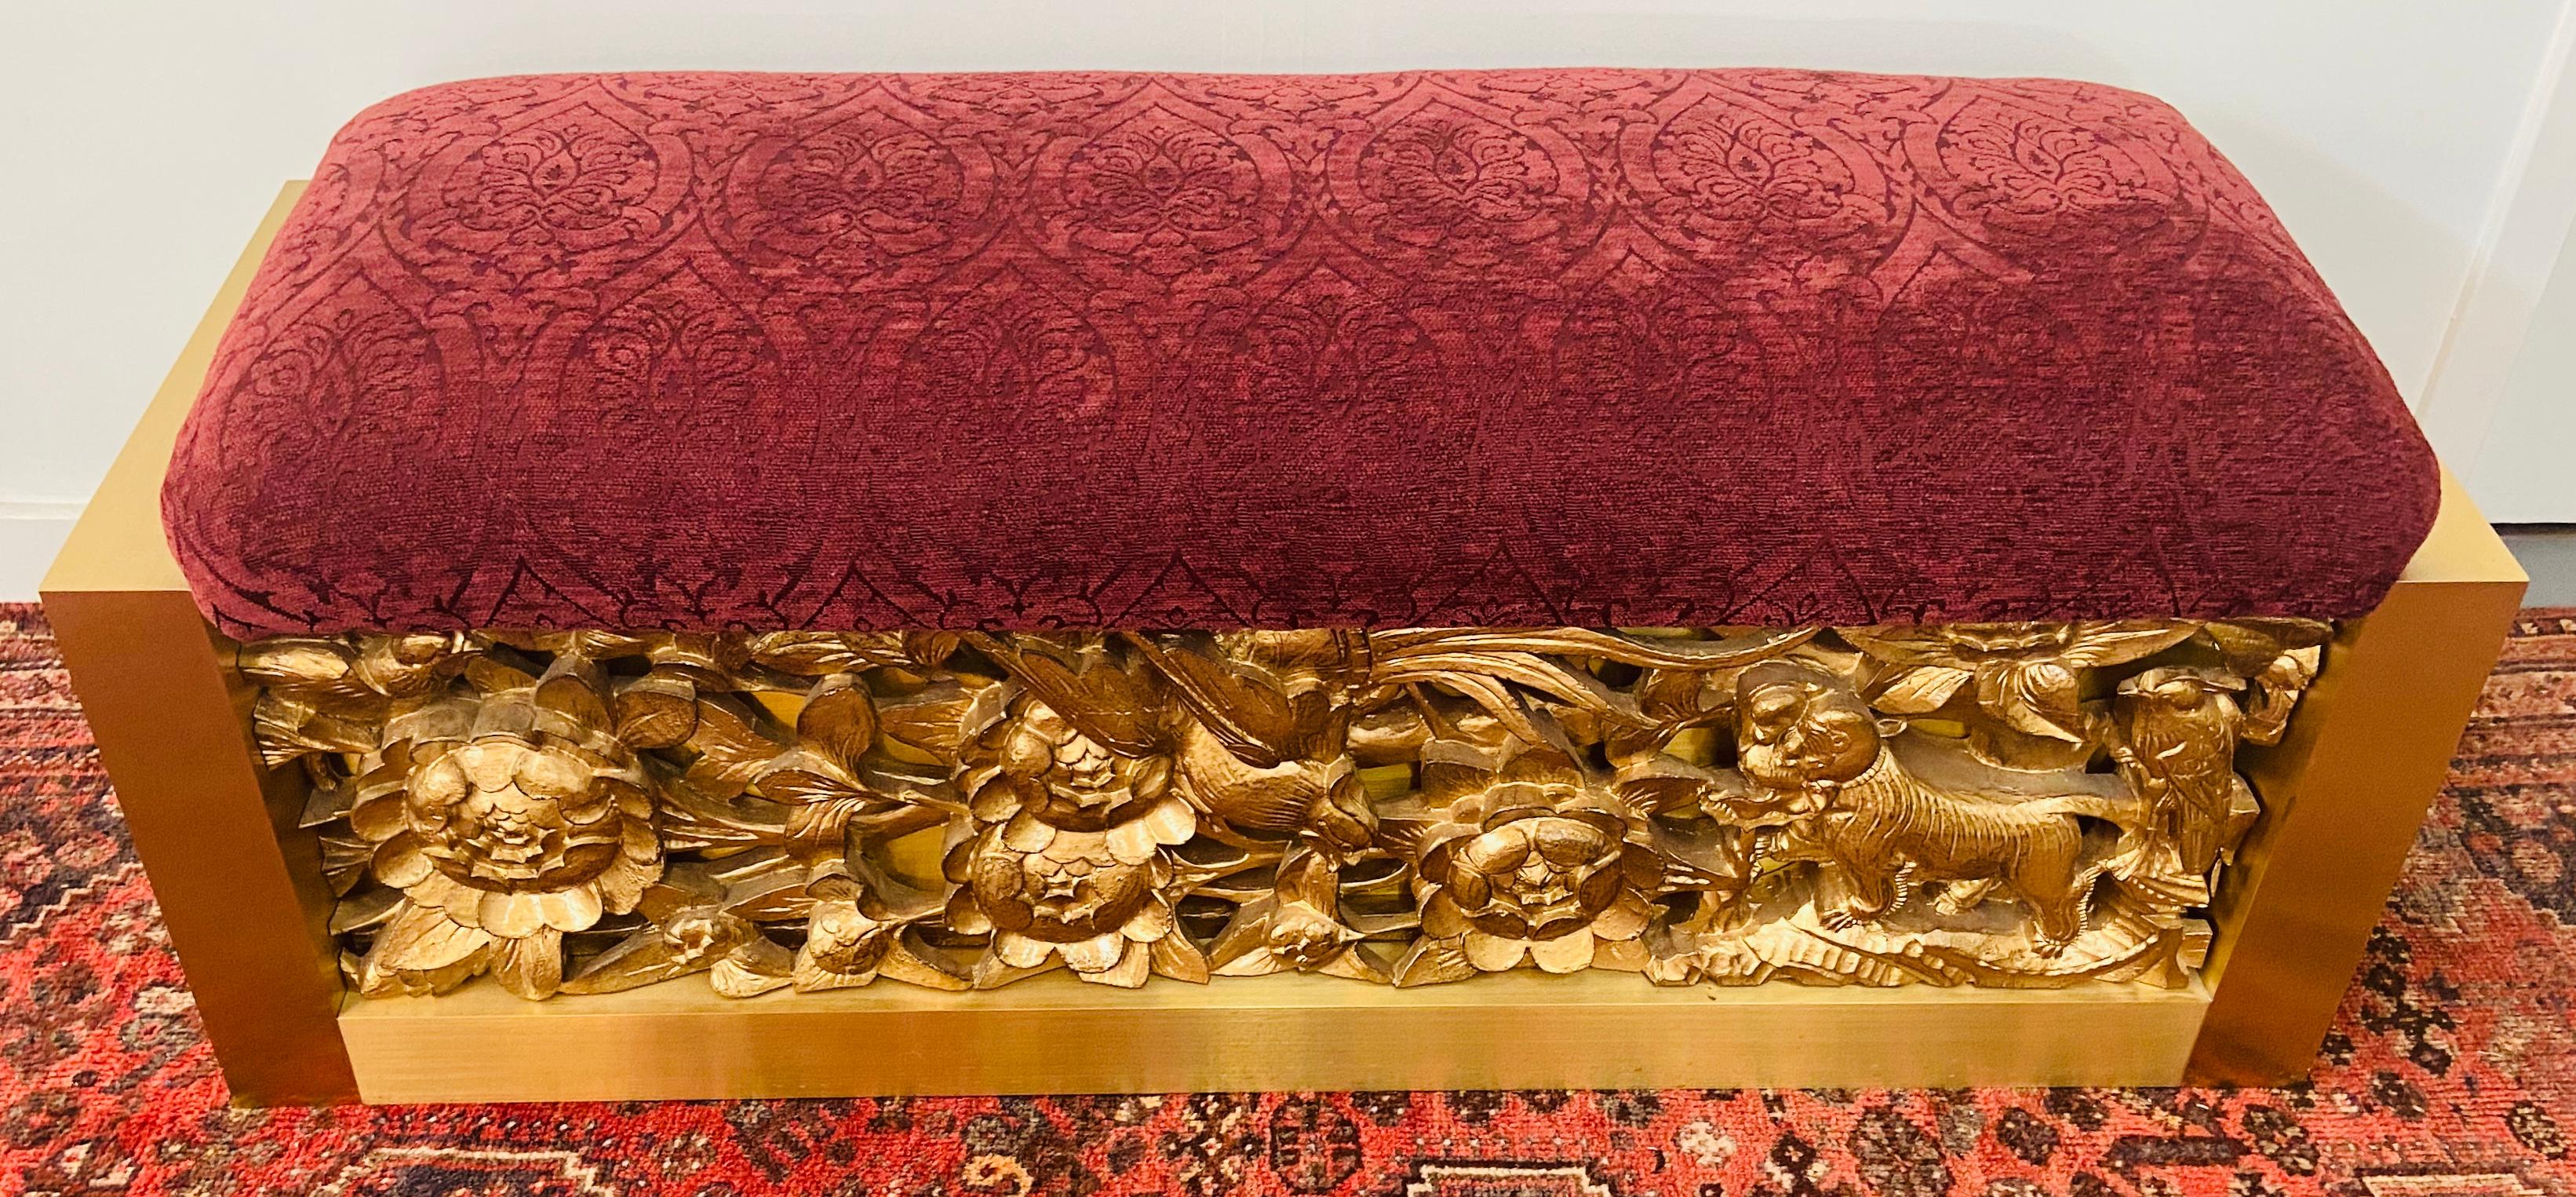 A stunning red suede top bench by Lorin Marsh. This one of a kind bench features a fine hand carved gilt wood base on both side (Front and Back). The bench sides are made of steel in an elegant beveled cut. The carving shows flowers, leafs, birds